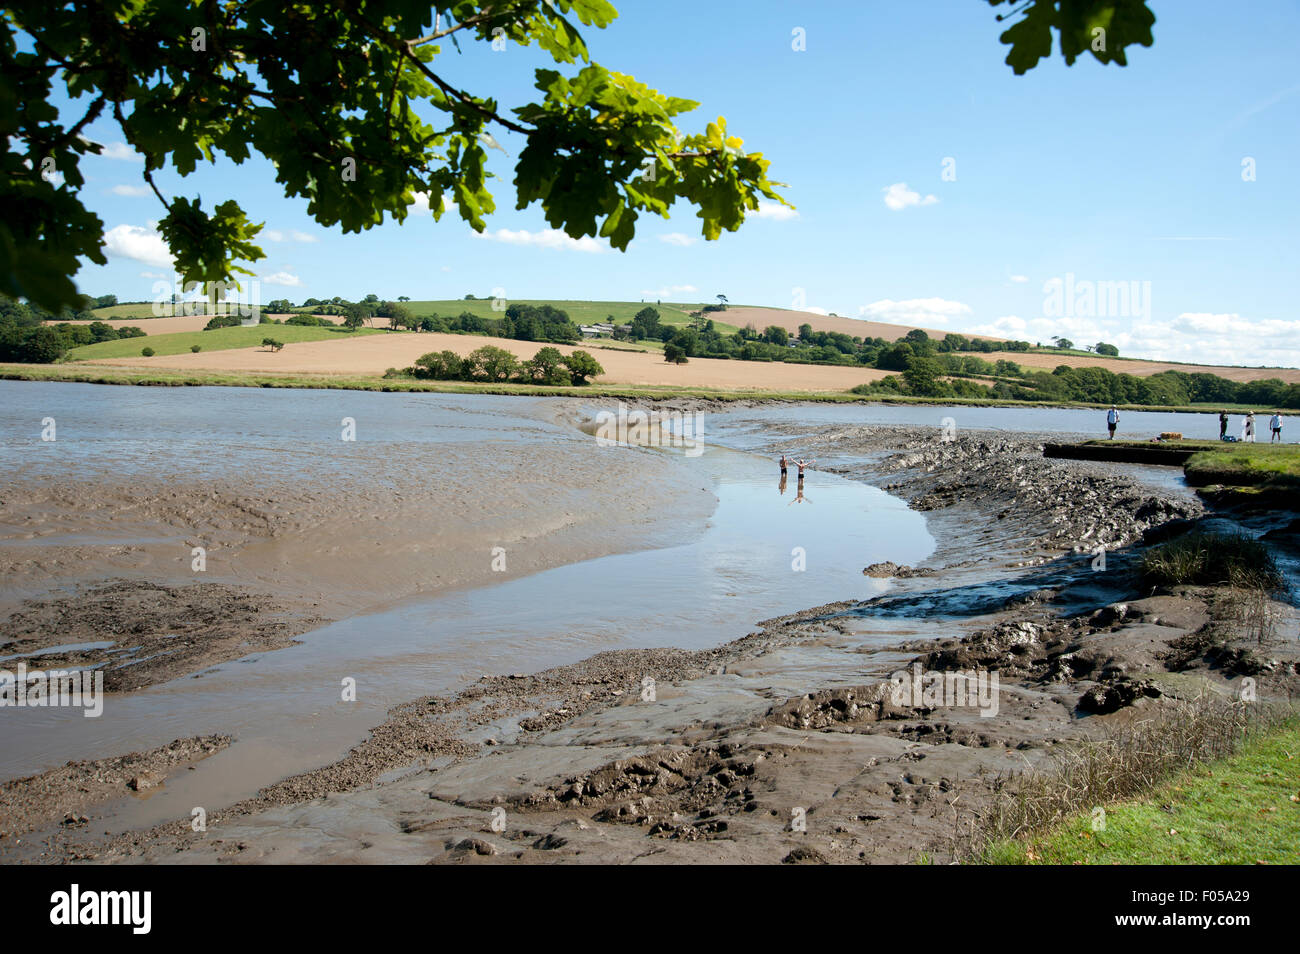 Two men wade in the shallow waters of the muddy estuary at the Port Eliot Festival Cornwall Stock Photo